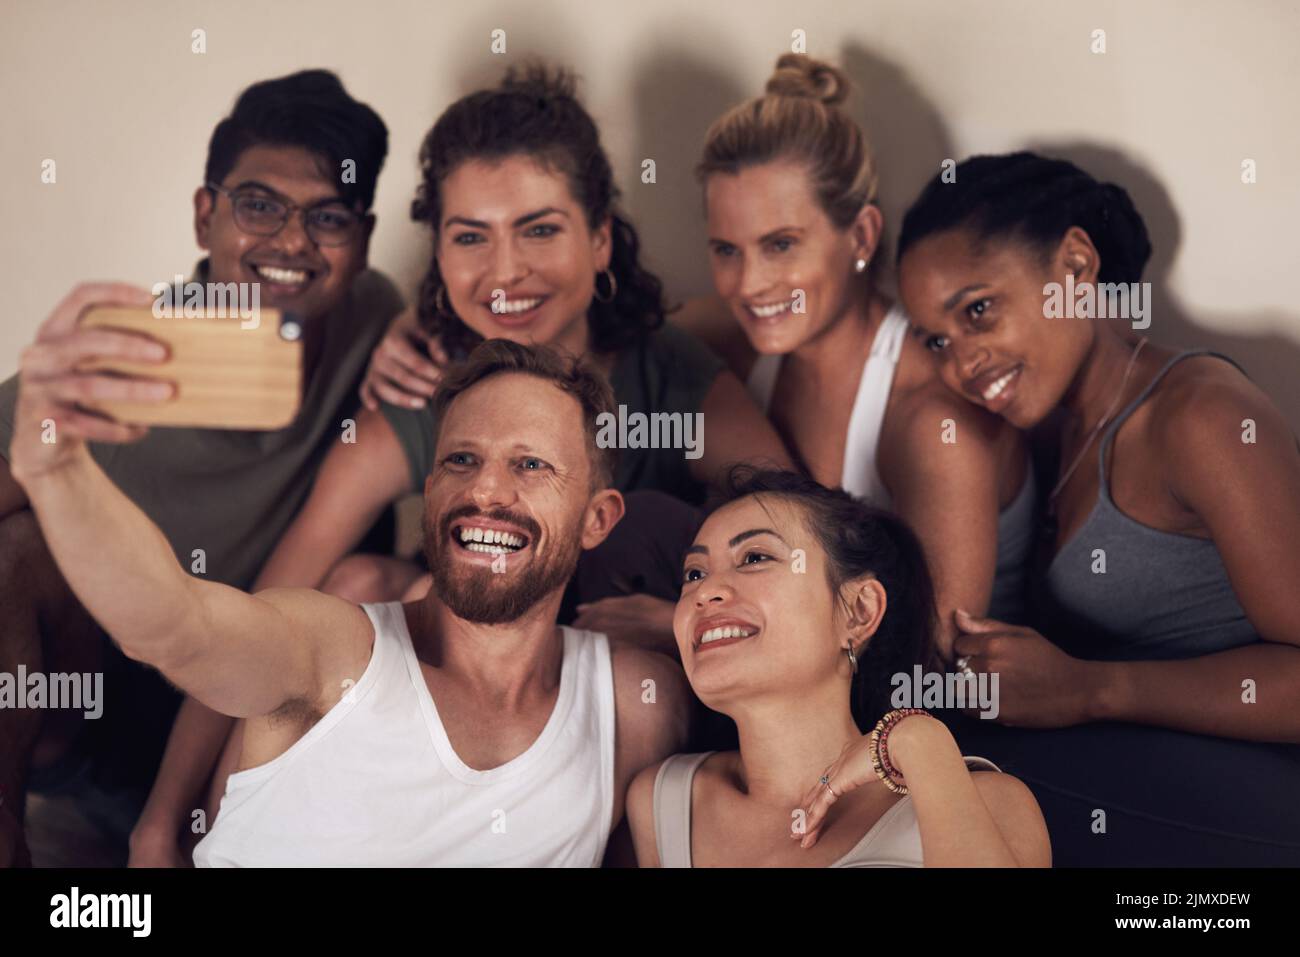 Post workout selfies are always the best. a group of young people taking selfies after working out together in a yoga class. Stock Photo